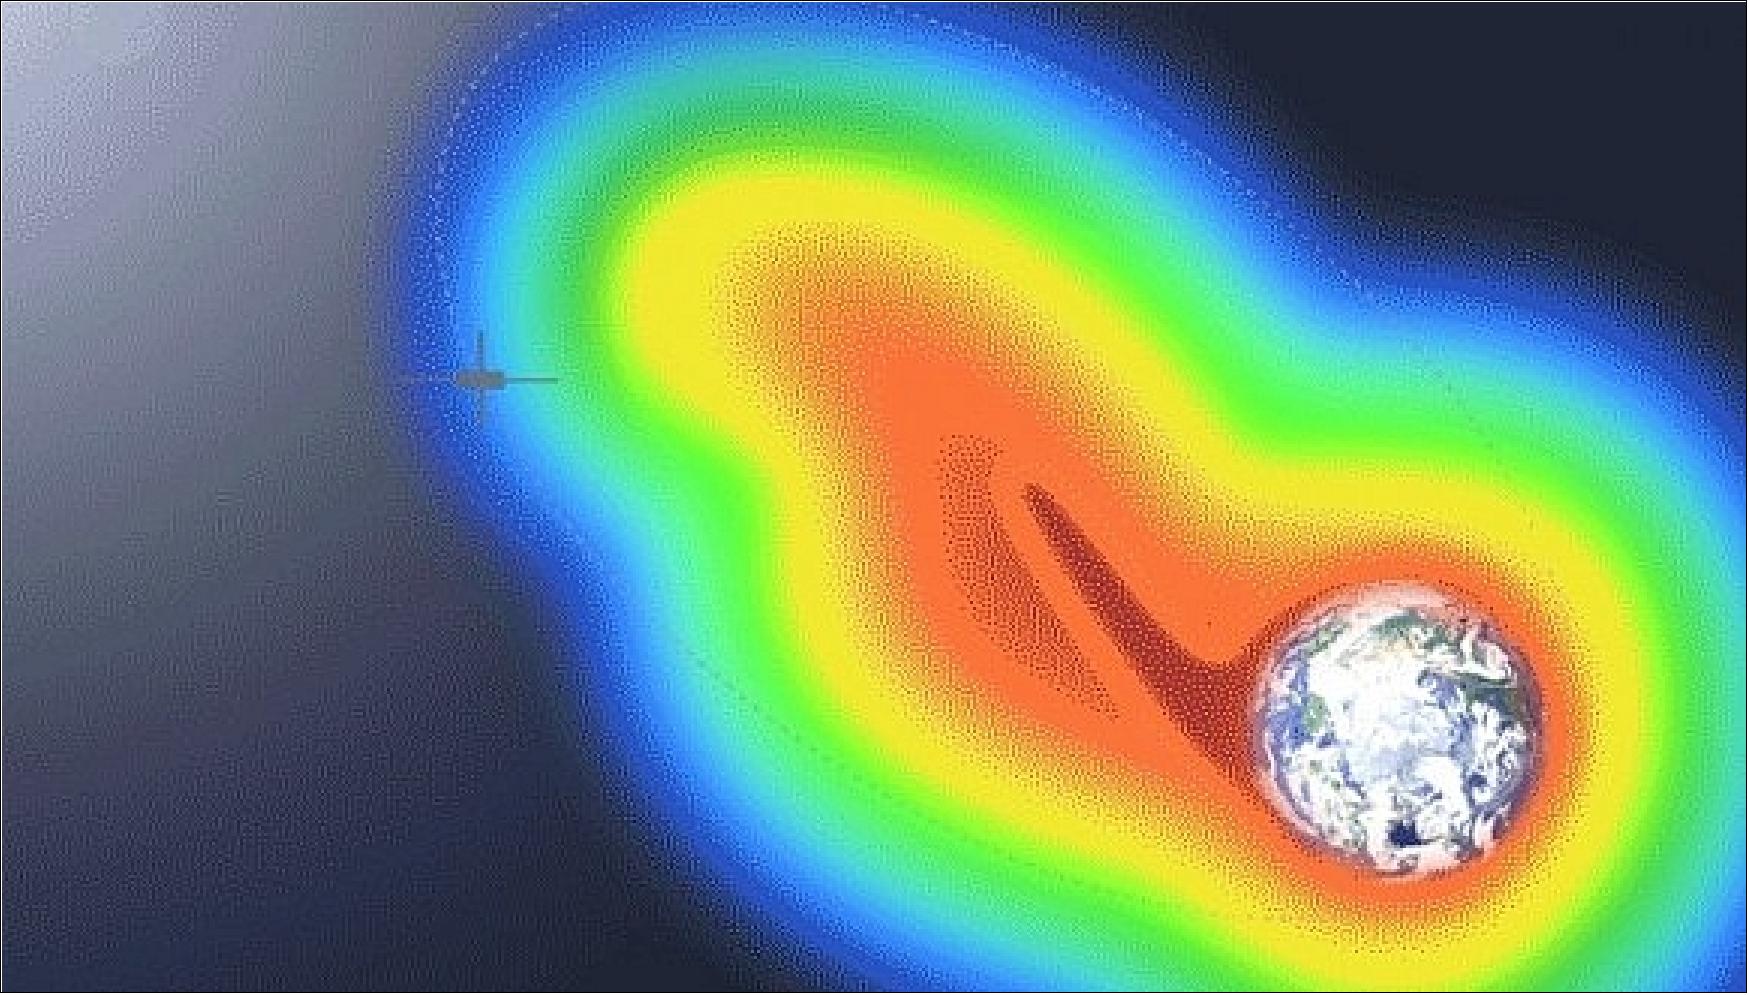 Figure 38: NASA's THEMIS mission observed how dense particles normally near Earth in a layer of the uppermost atmosphere, called the plasmasphere, can send a plume up through space to help protect against incoming solar particles during certain space weather events (image credit: NASA/GSFC)